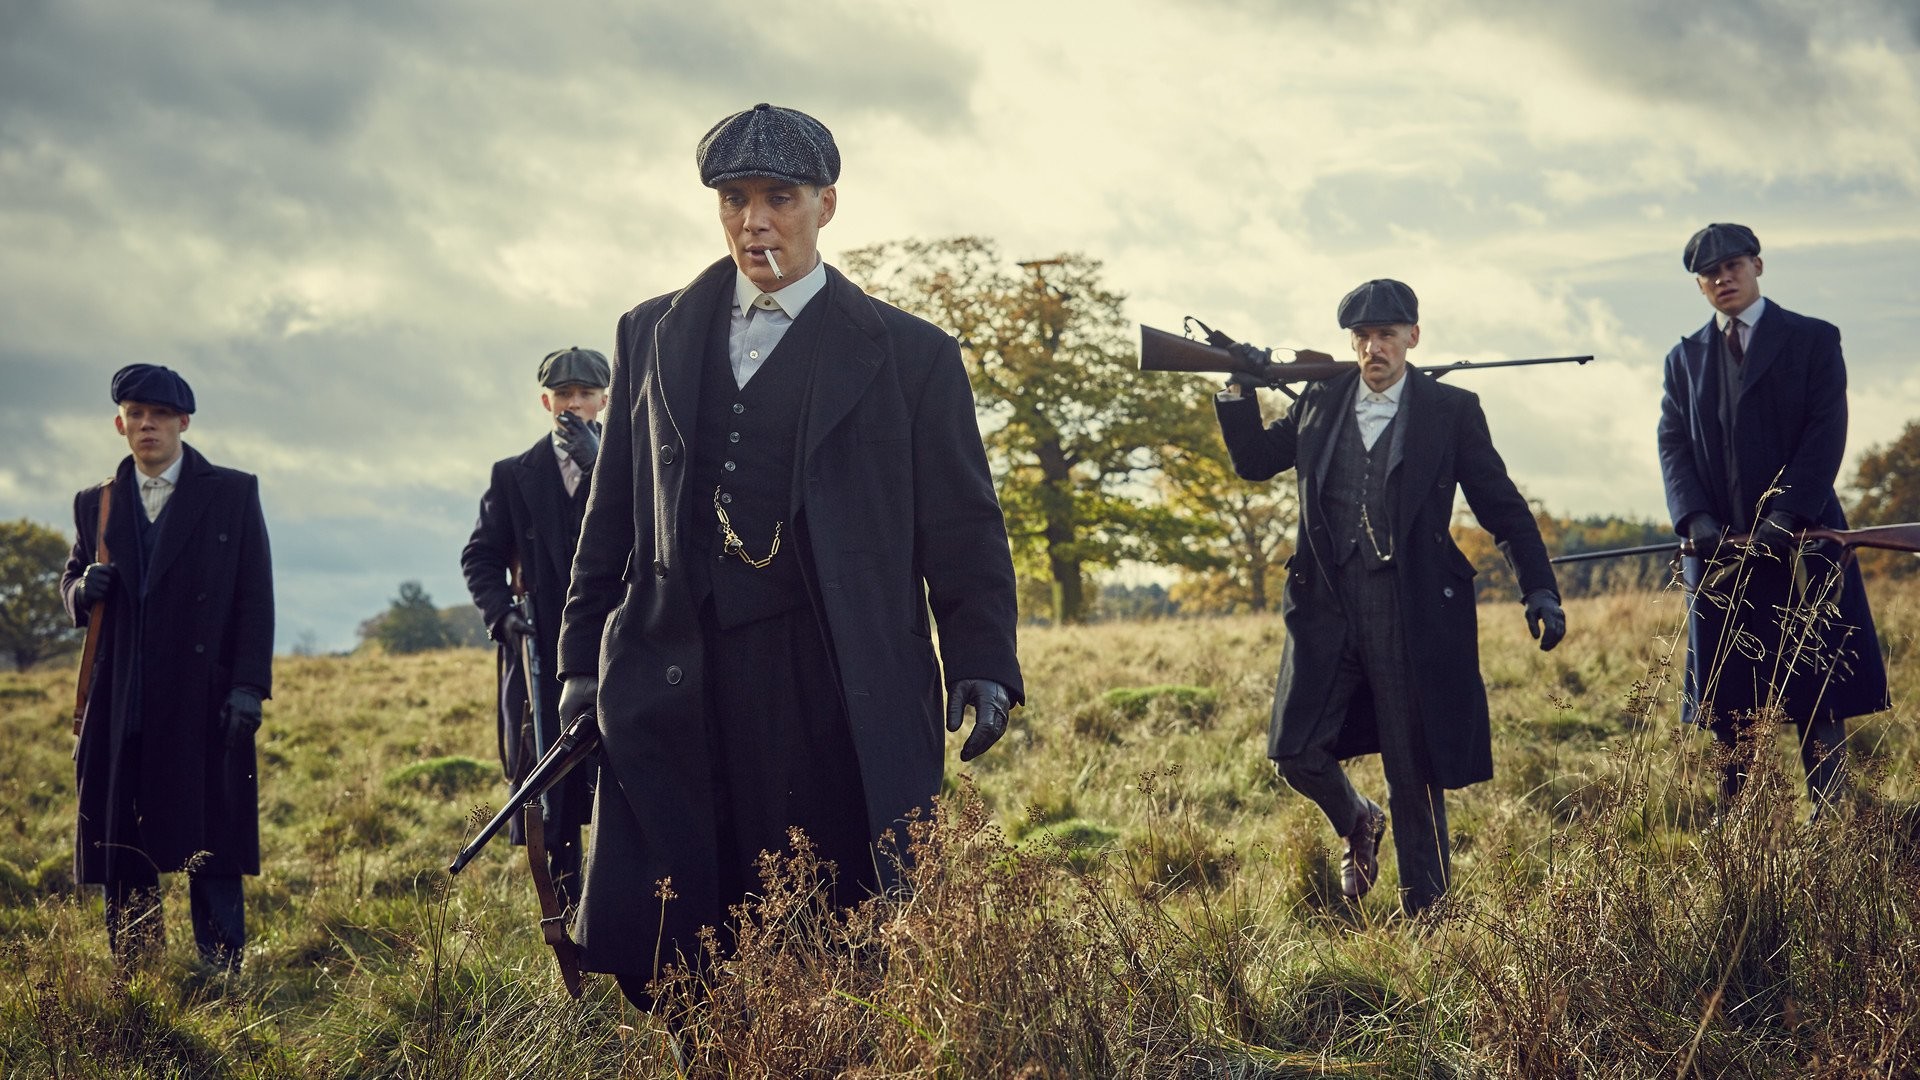 peaky blinders wallpaper,outerwear,uniform,adaptation,photography,suit